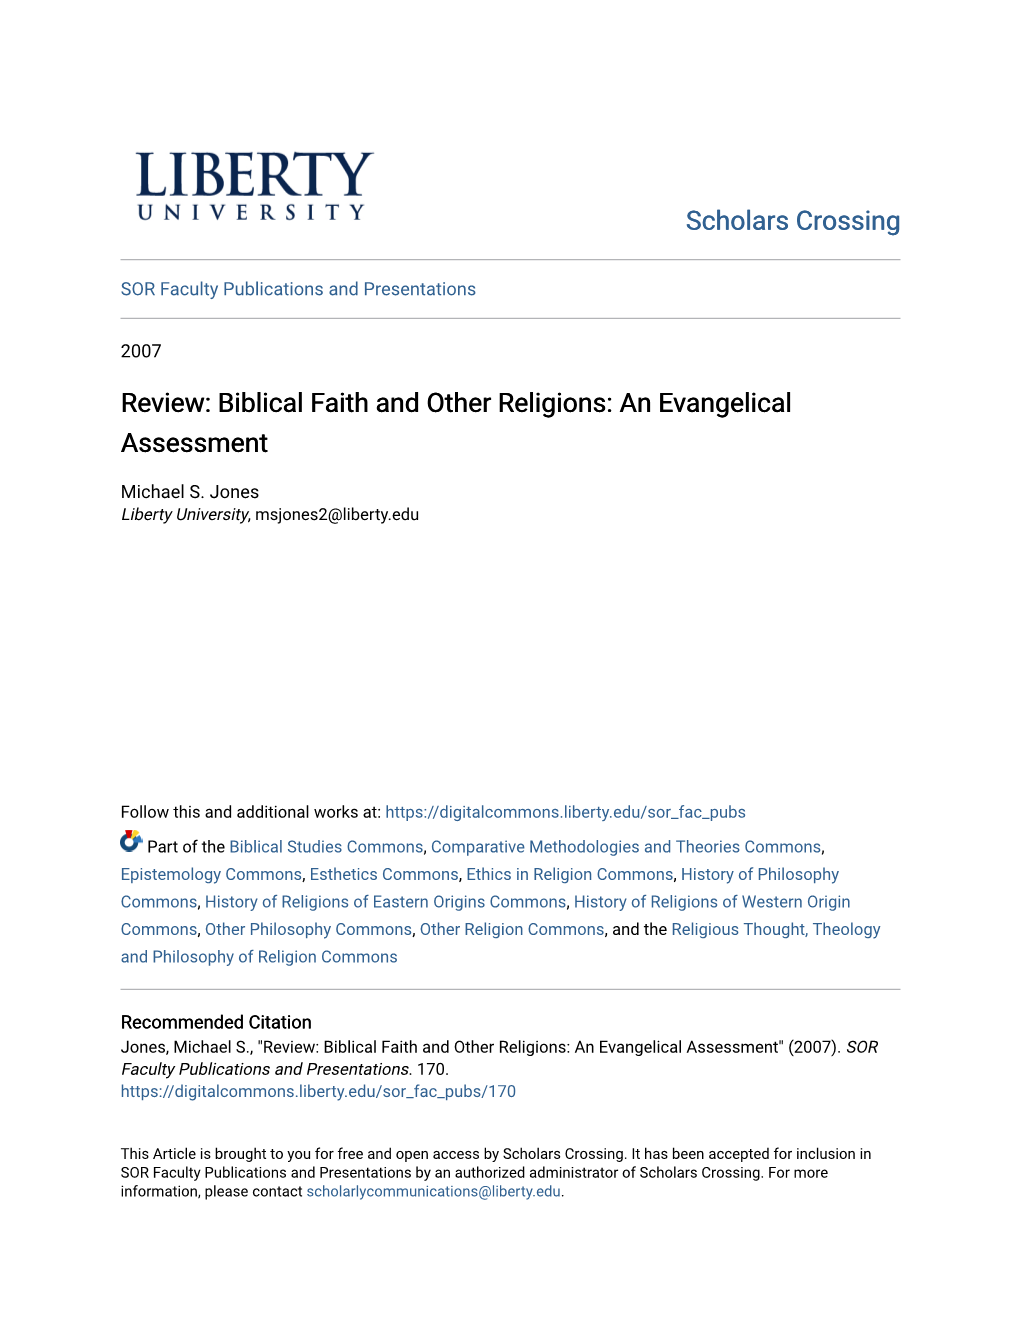 Biblical Faith and Other Religions: an Evangelical Assessment